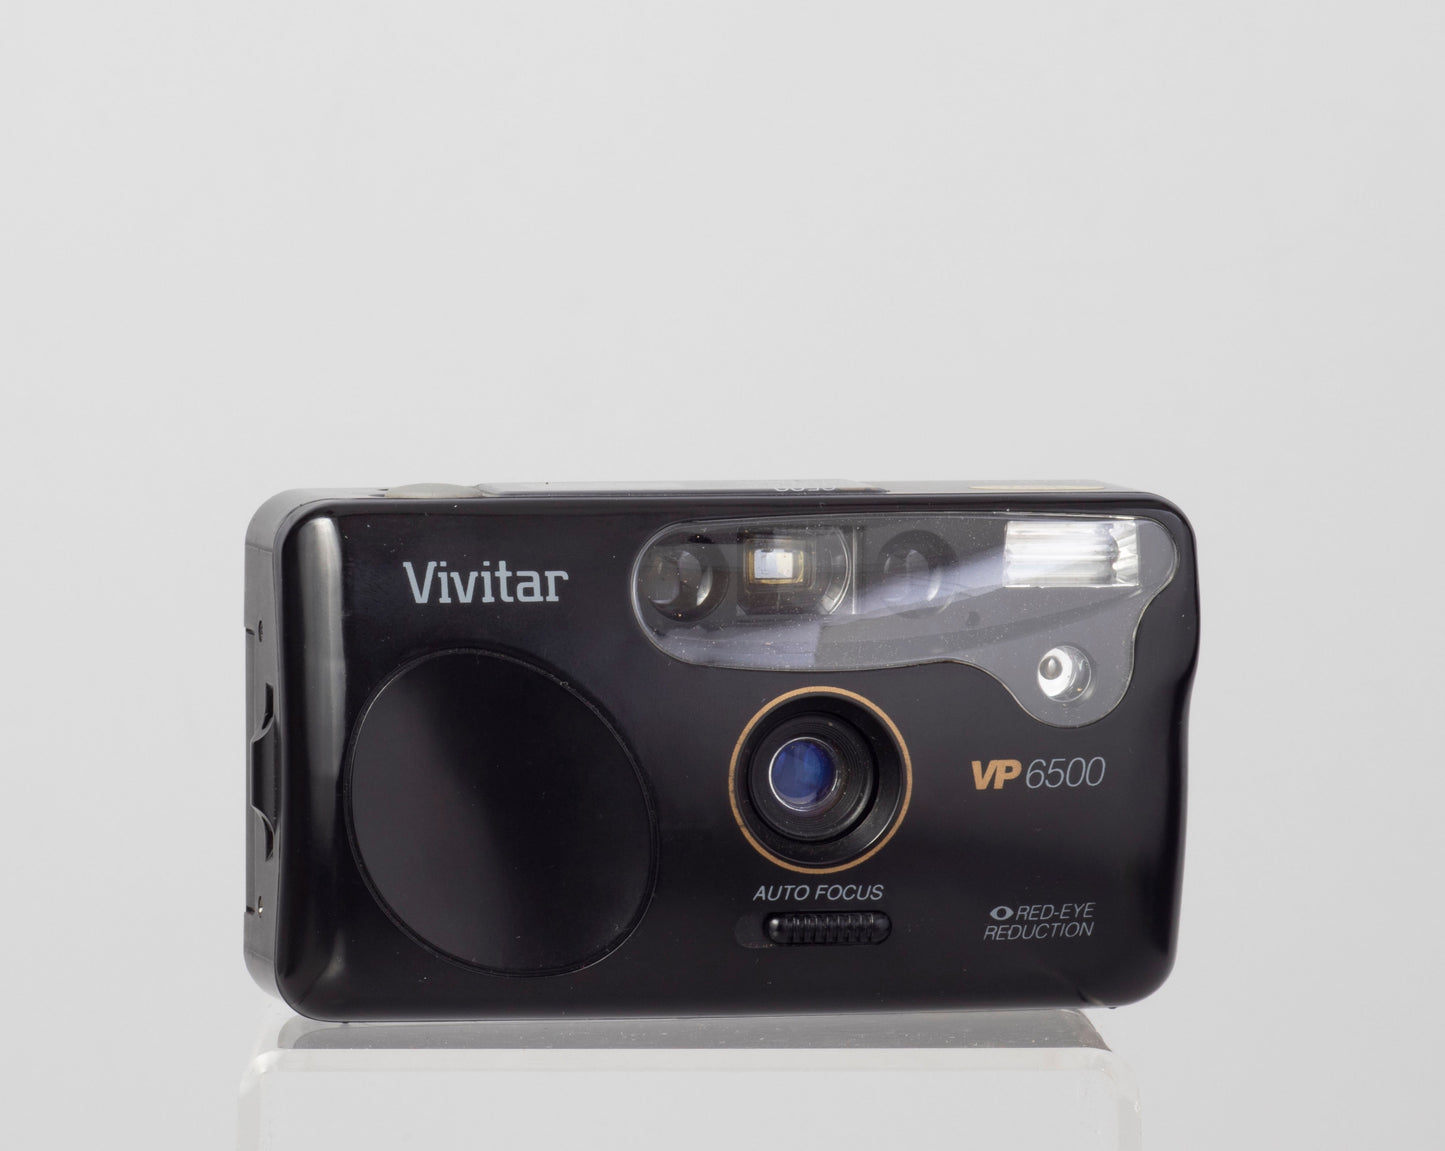 The Vivitar VP6500 is a compact 35mm point-and-shoot camera from the 1990s with some interesting features (including a multiple exposure mode)